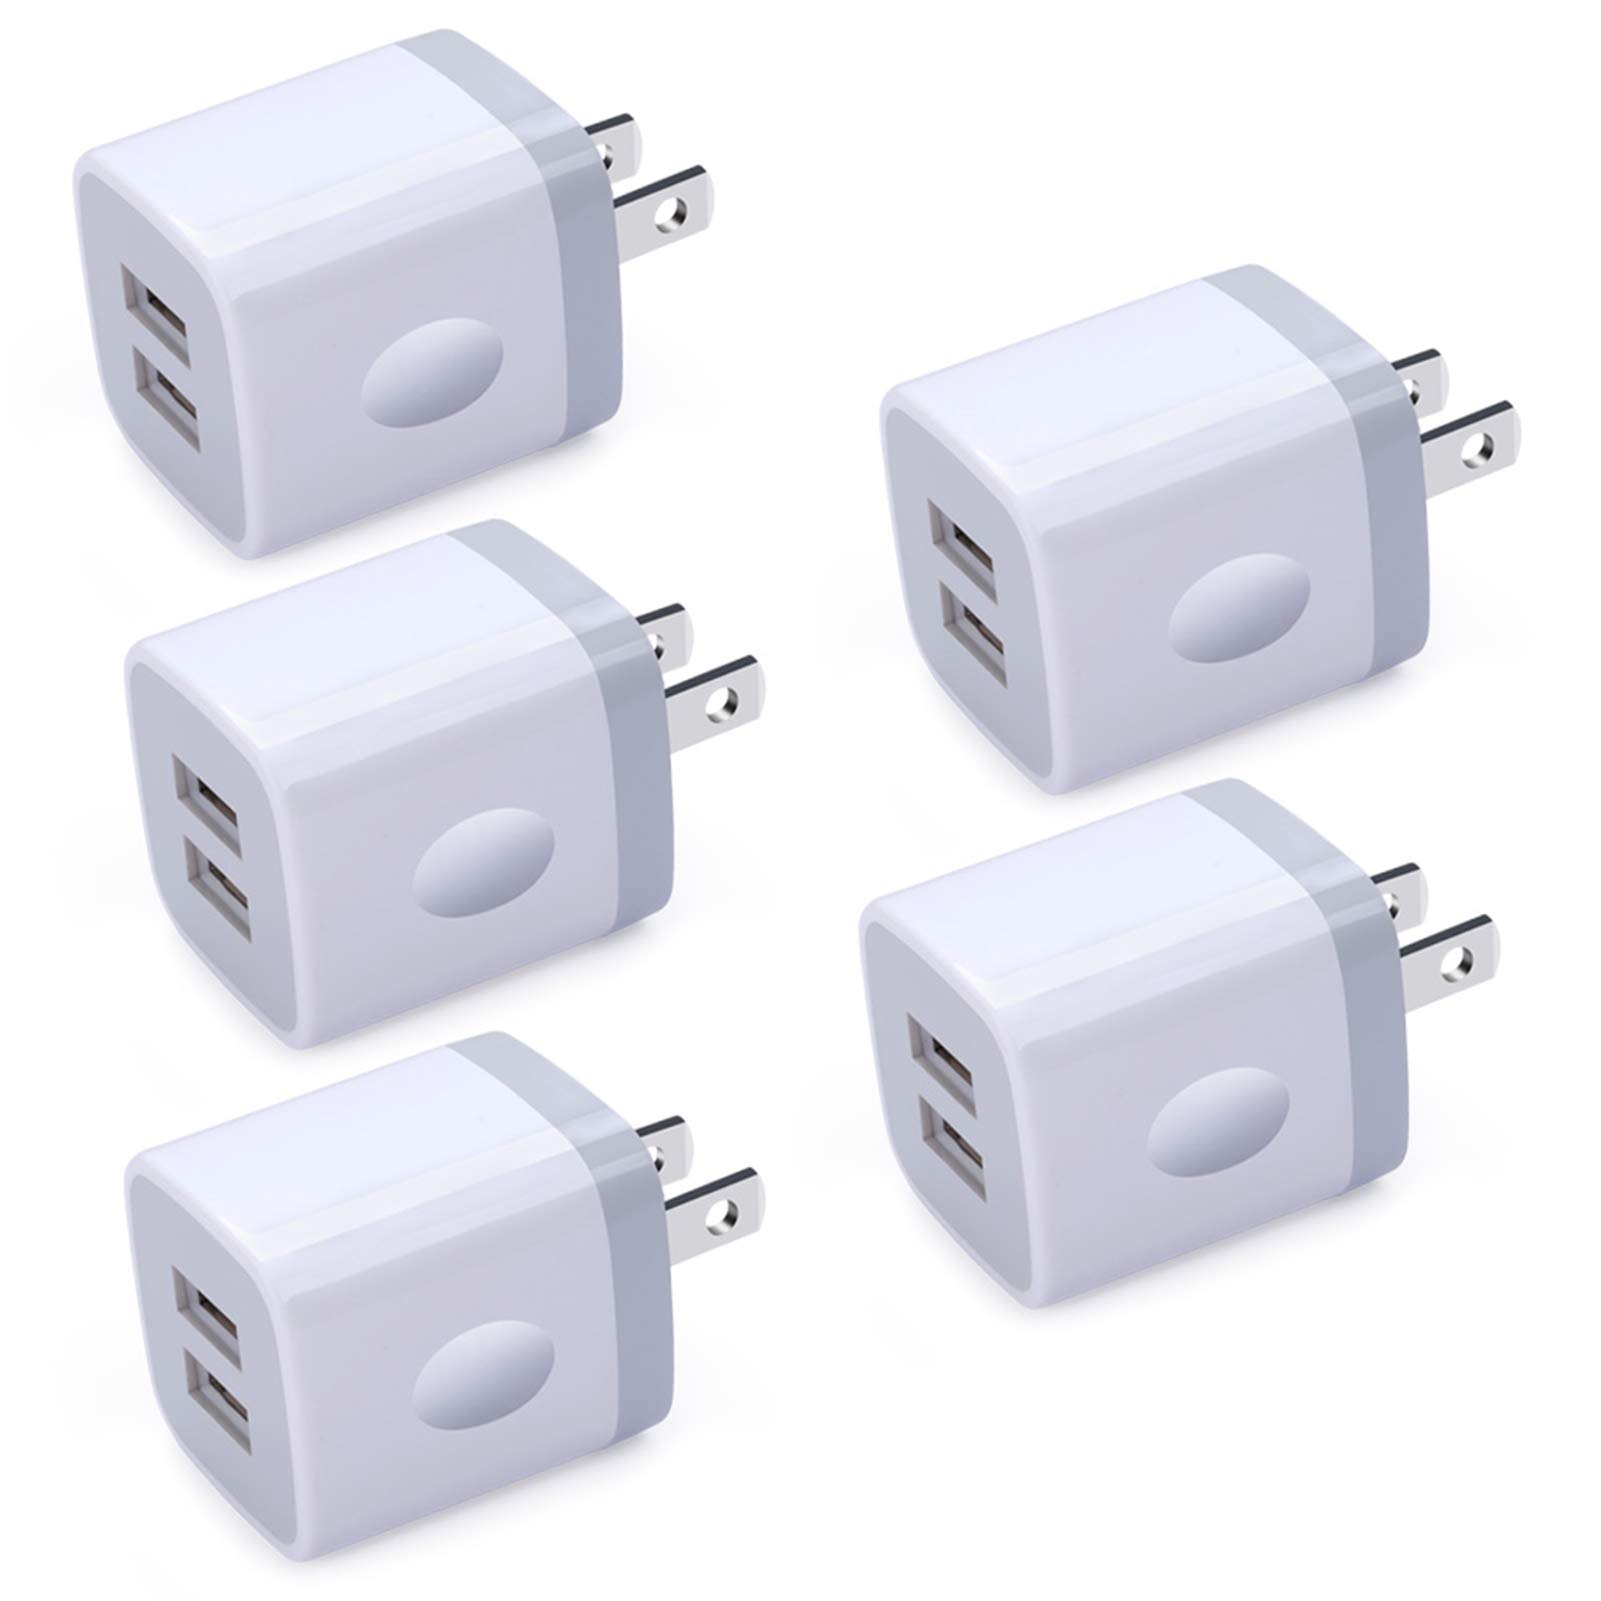 Book Cover USB Wall Charger,Charging Block,5Pack 2.1A Quick Dual Port Plug Charger Box Cubes for iPhone 14 13 12 11 Pro Max XR 8 7 6 Plus,Samsung Galaxy S23 S23+ S22 S22+ S21 Ultra S10 S20 Plus A14 A13 A33 A53 White